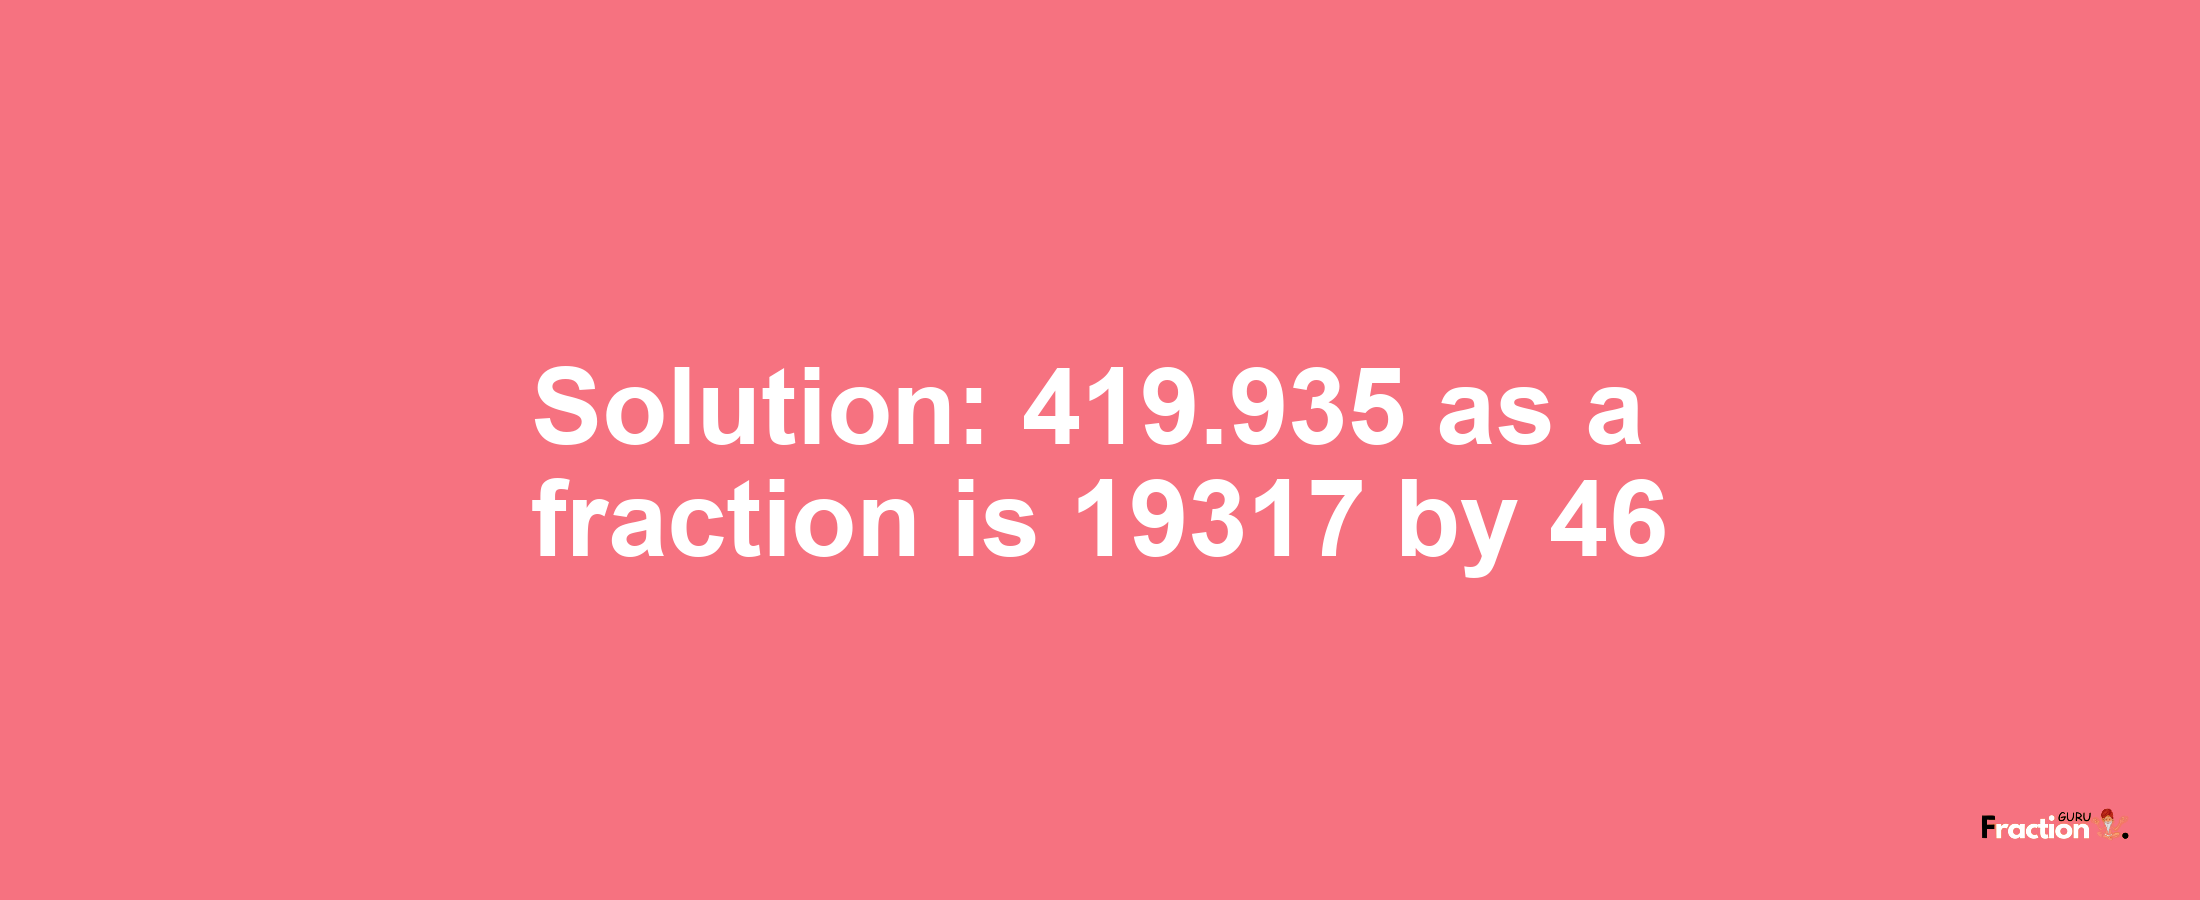 Solution:419.935 as a fraction is 19317/46